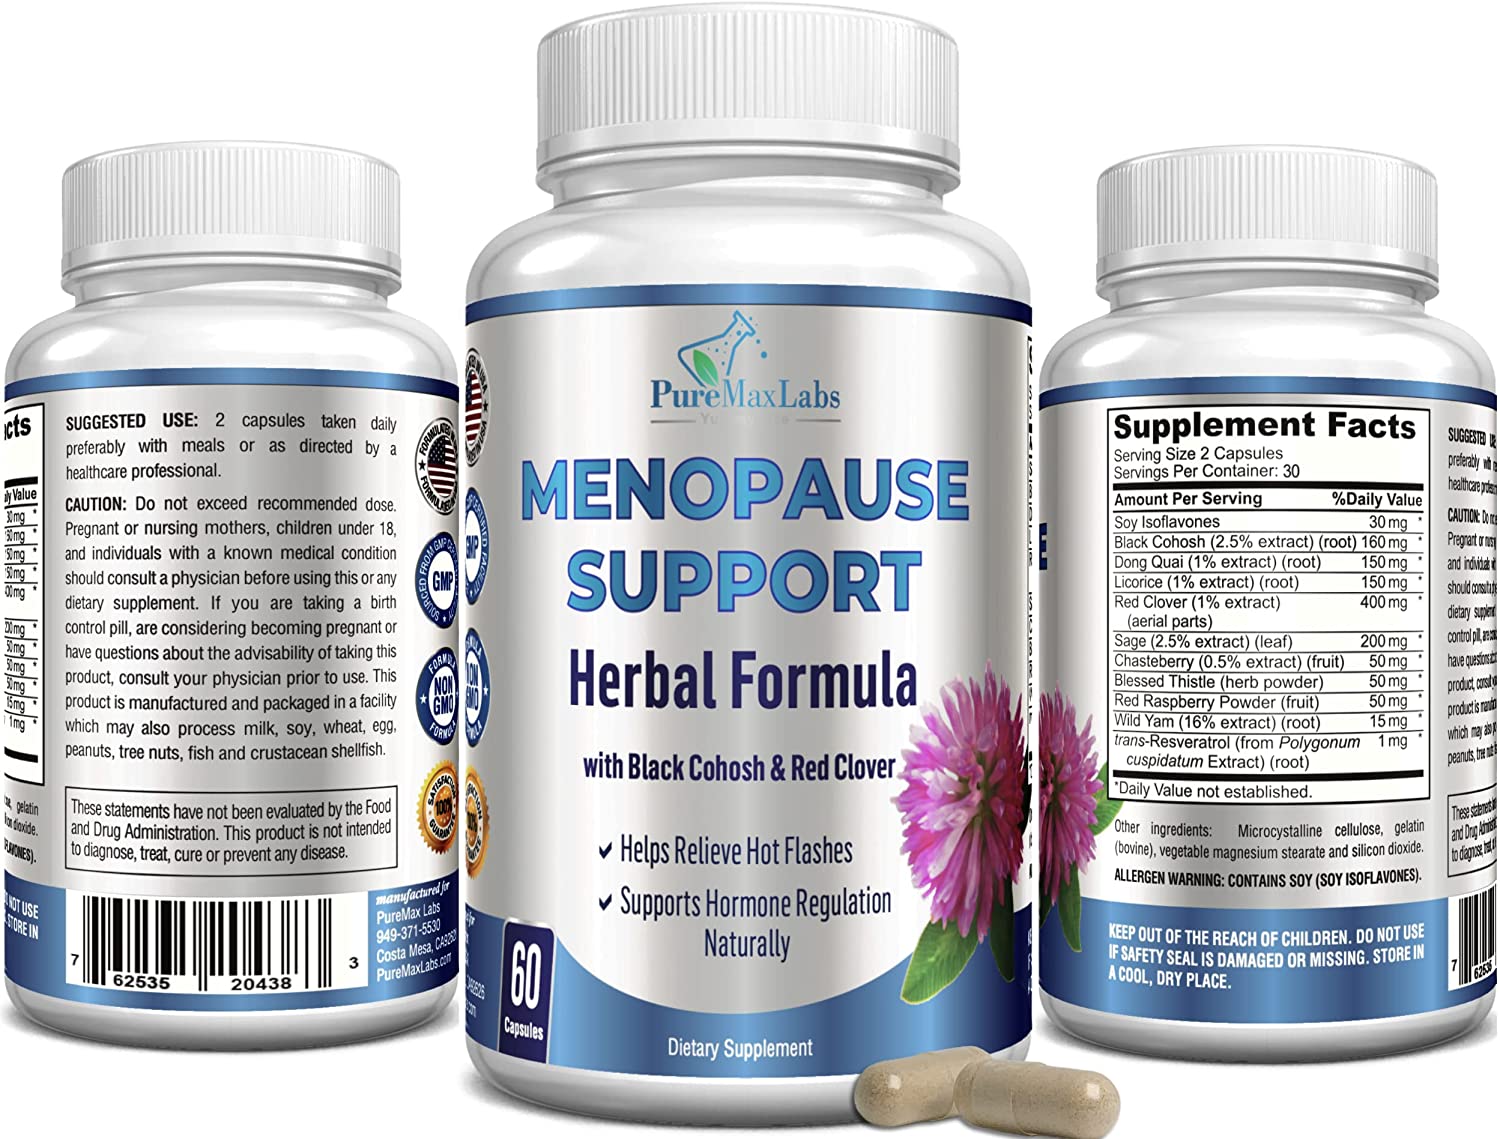 Menopause Support Herbal Formula for Women - 60 Capsules